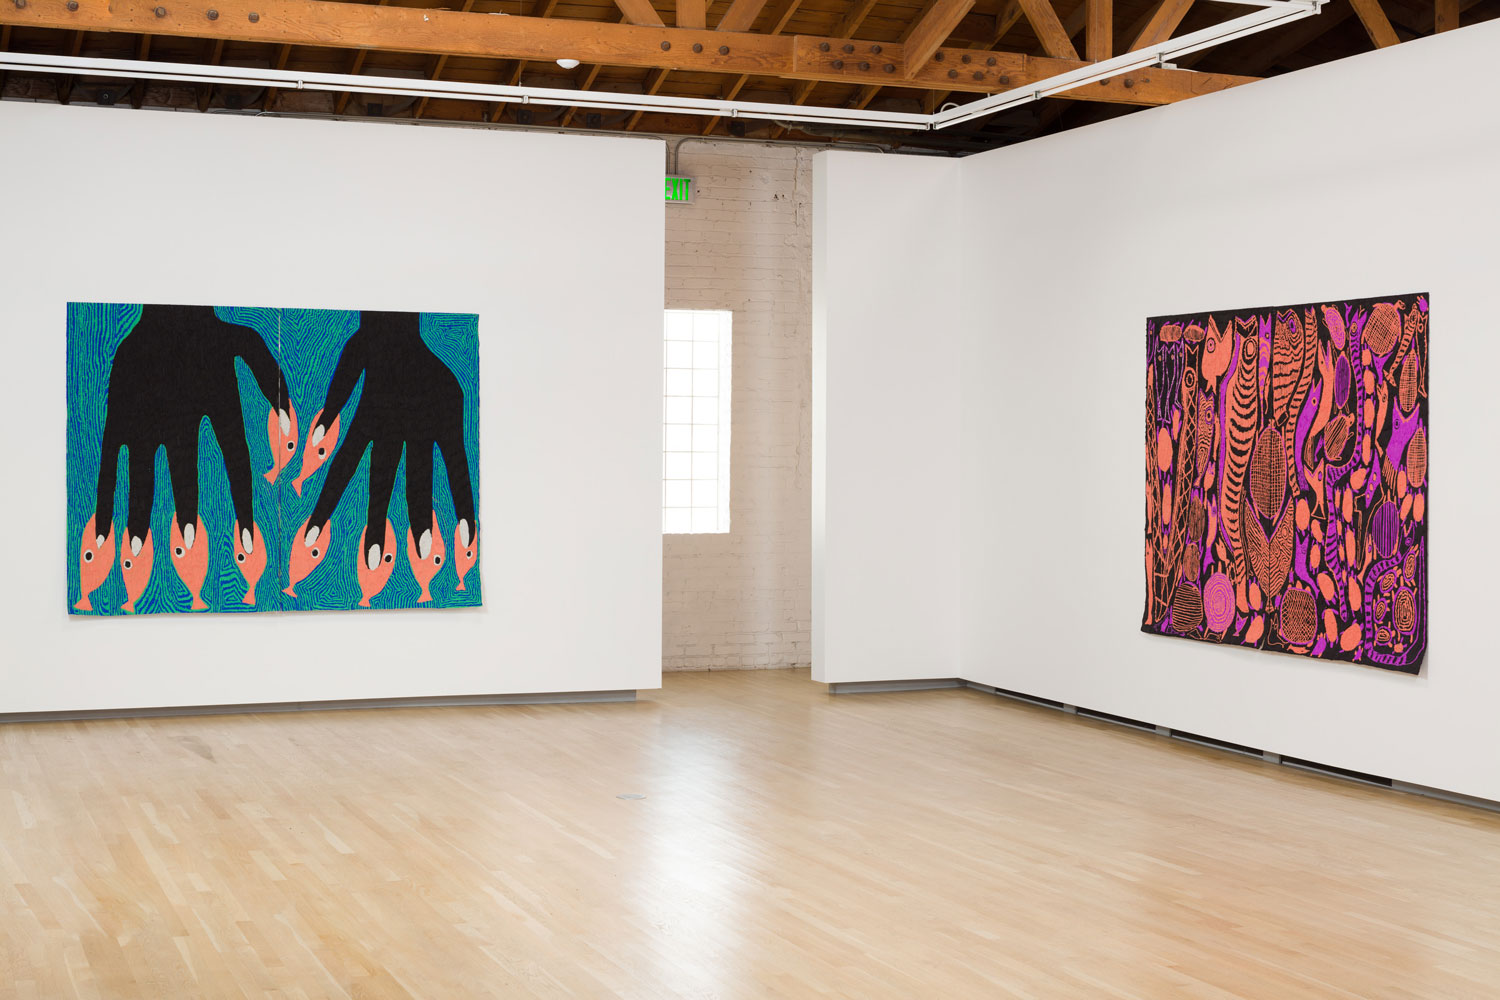 Summer Wheat, Catch and Release, 2018, Installation view, Shulamit Nazarian, Los Angeles